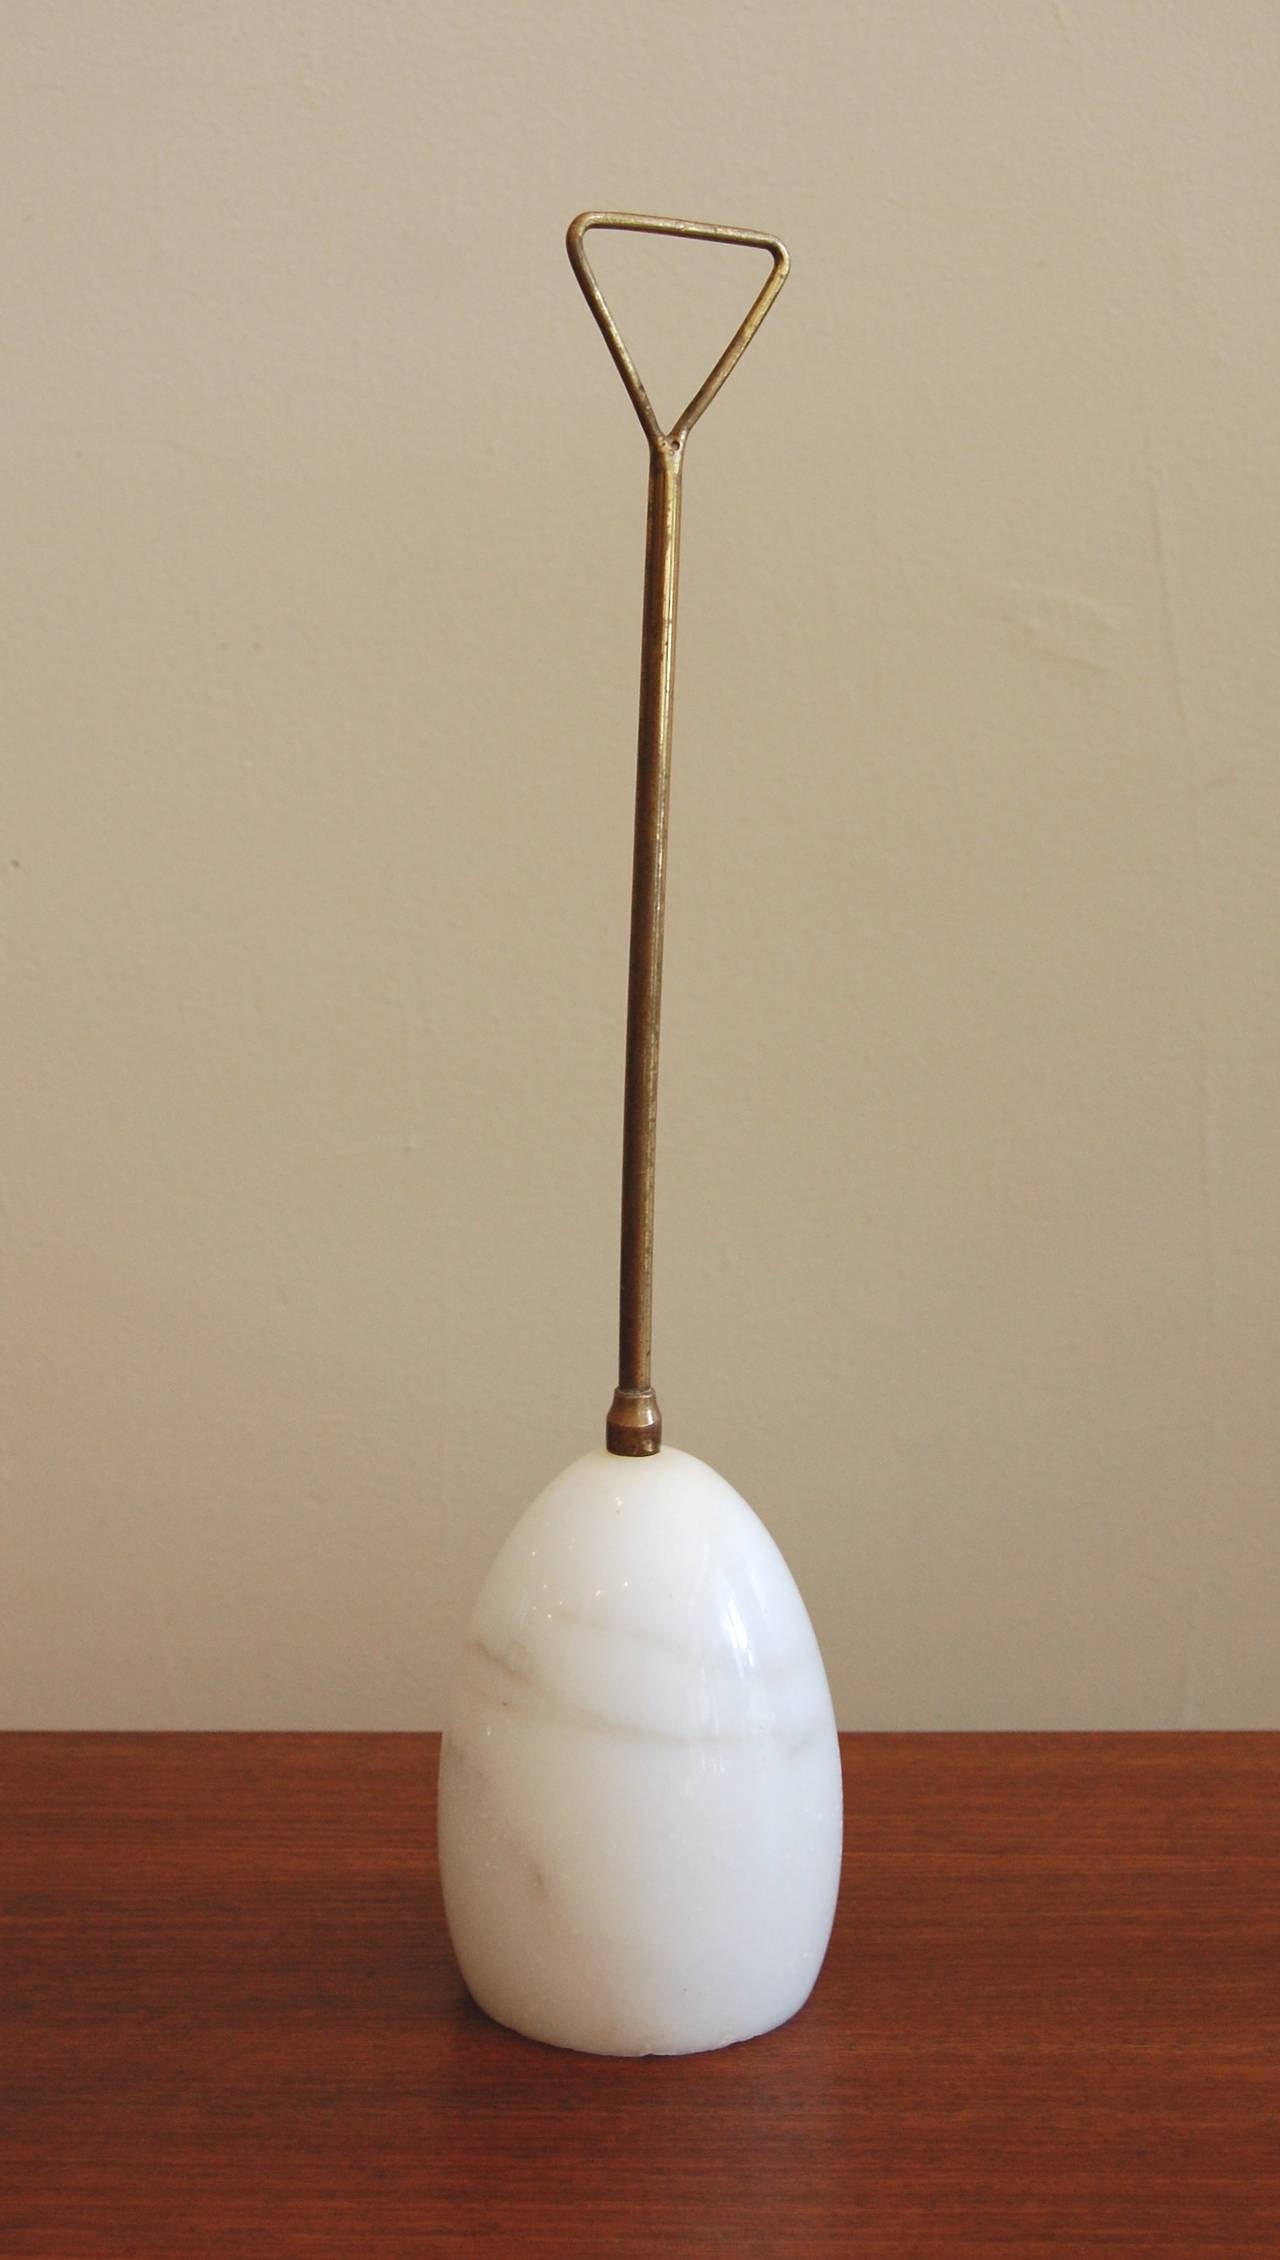 Vintage 1960s marble and brass door stop by Luigi Caccia Dominioni for Azucena of Milan. Brass handle with a nice patina (which can be polished out) attached to the Carrara marble base, in very nice vintage condition.